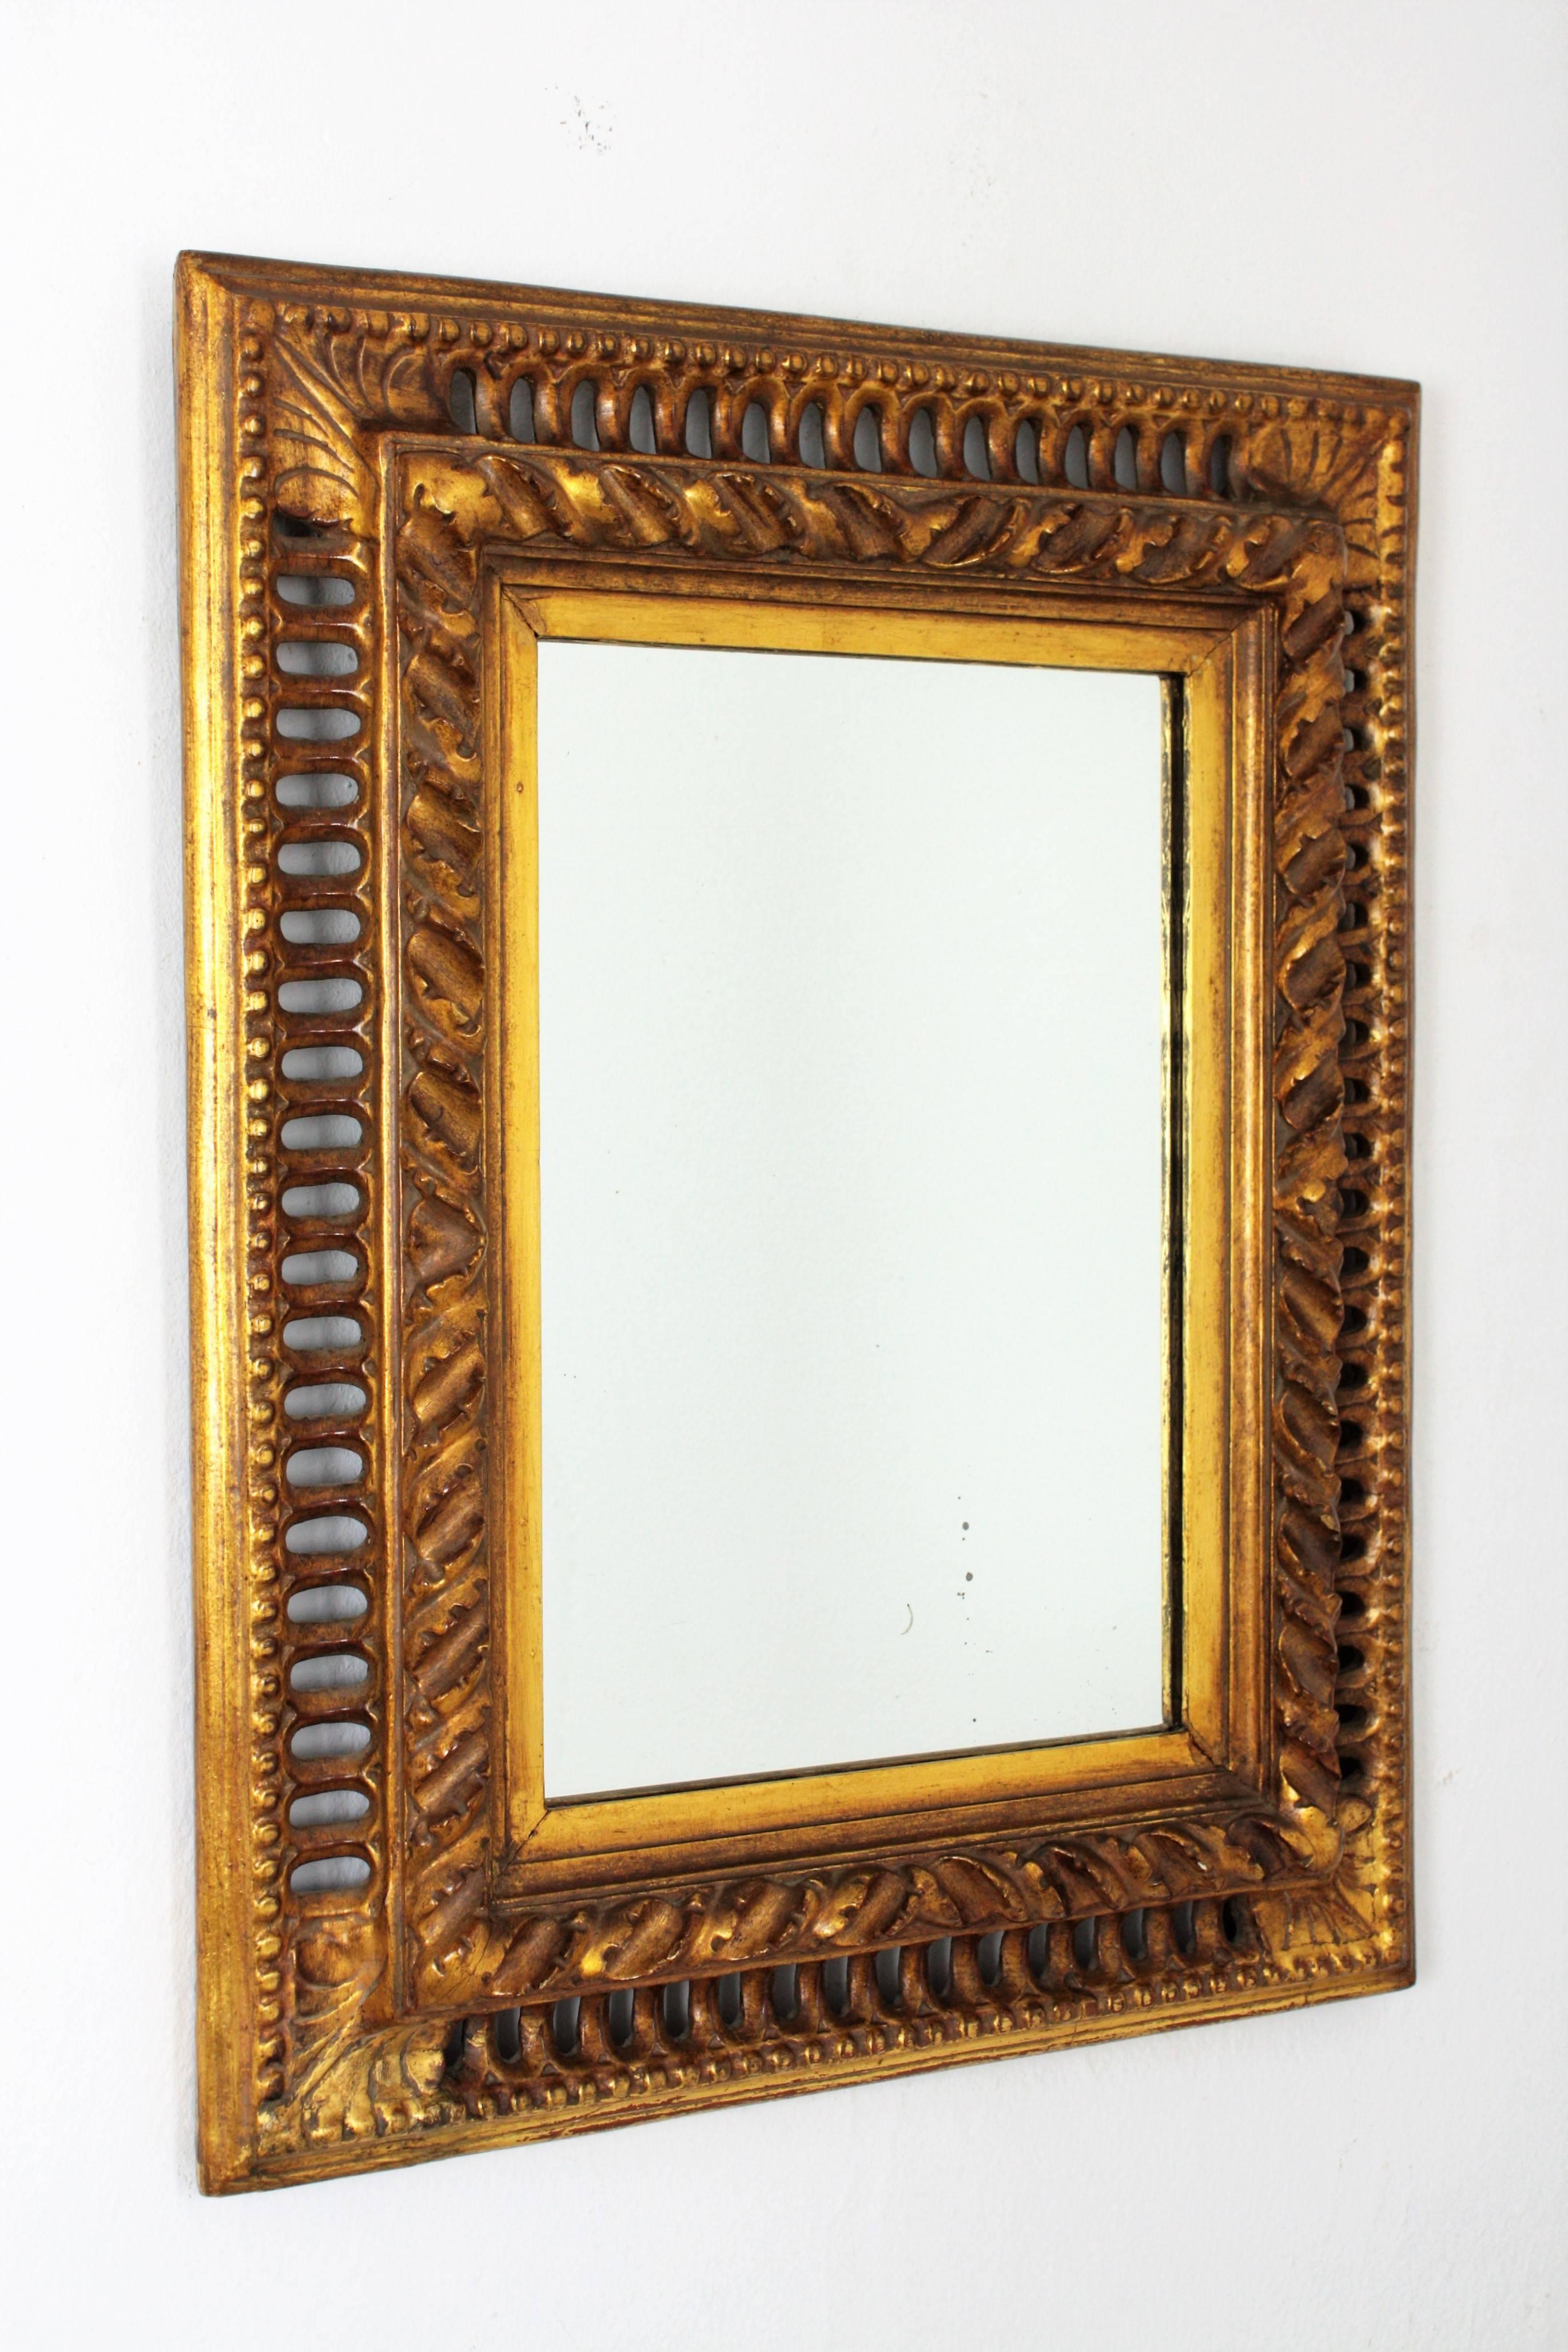 Exquisite hand carved Baroque style gold leaf giltwood mirror with reticulated frame, Spain, circa 1880.
The frame has a very beautiful hand carved work with a spiraling foliate border surrounding the glass mirror plate and coved reticulated outer